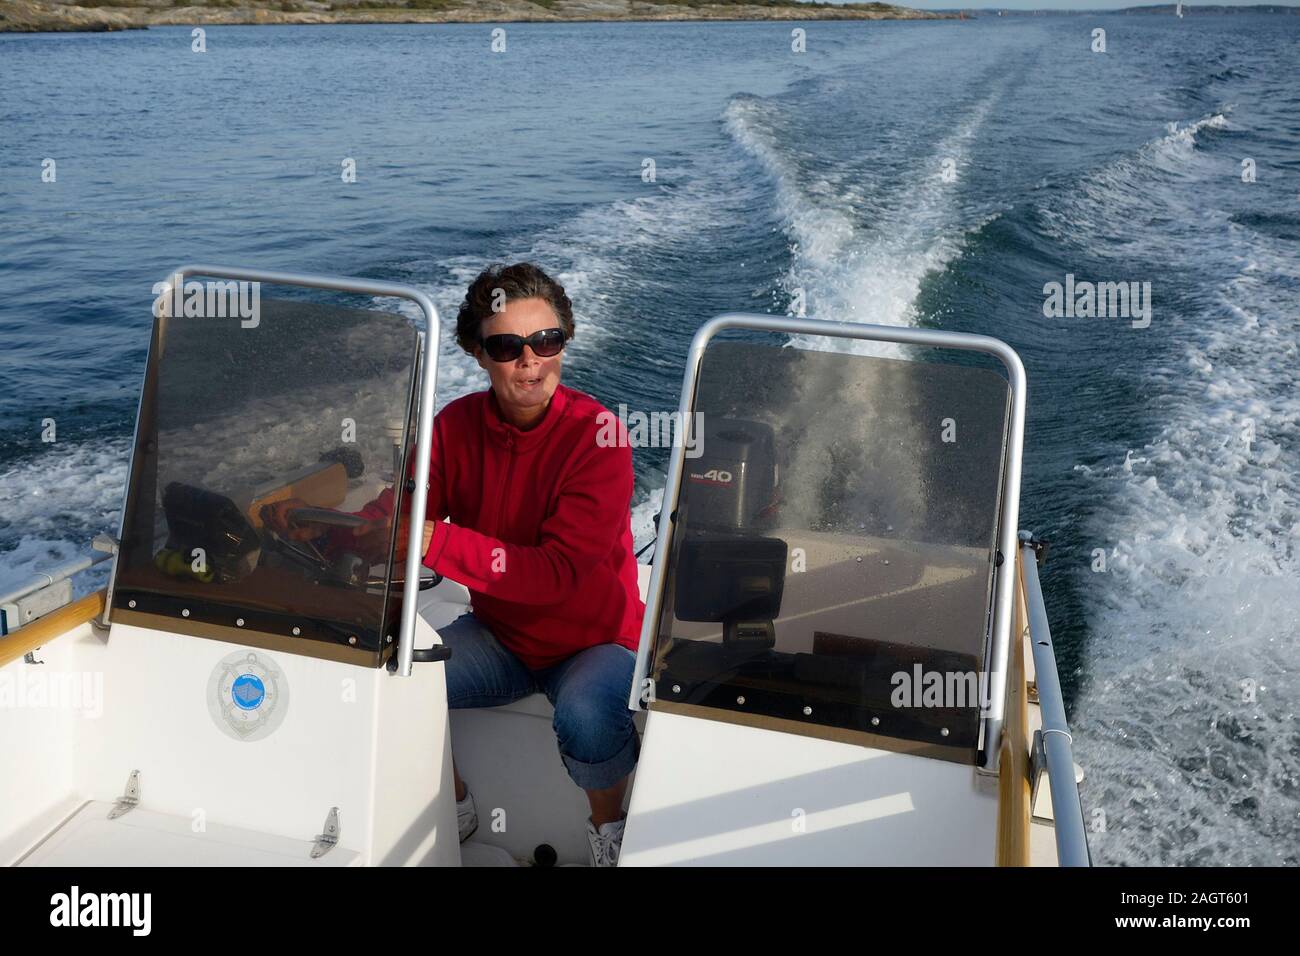 A woman steers a speed-boat on the calm sea. Stock Photo